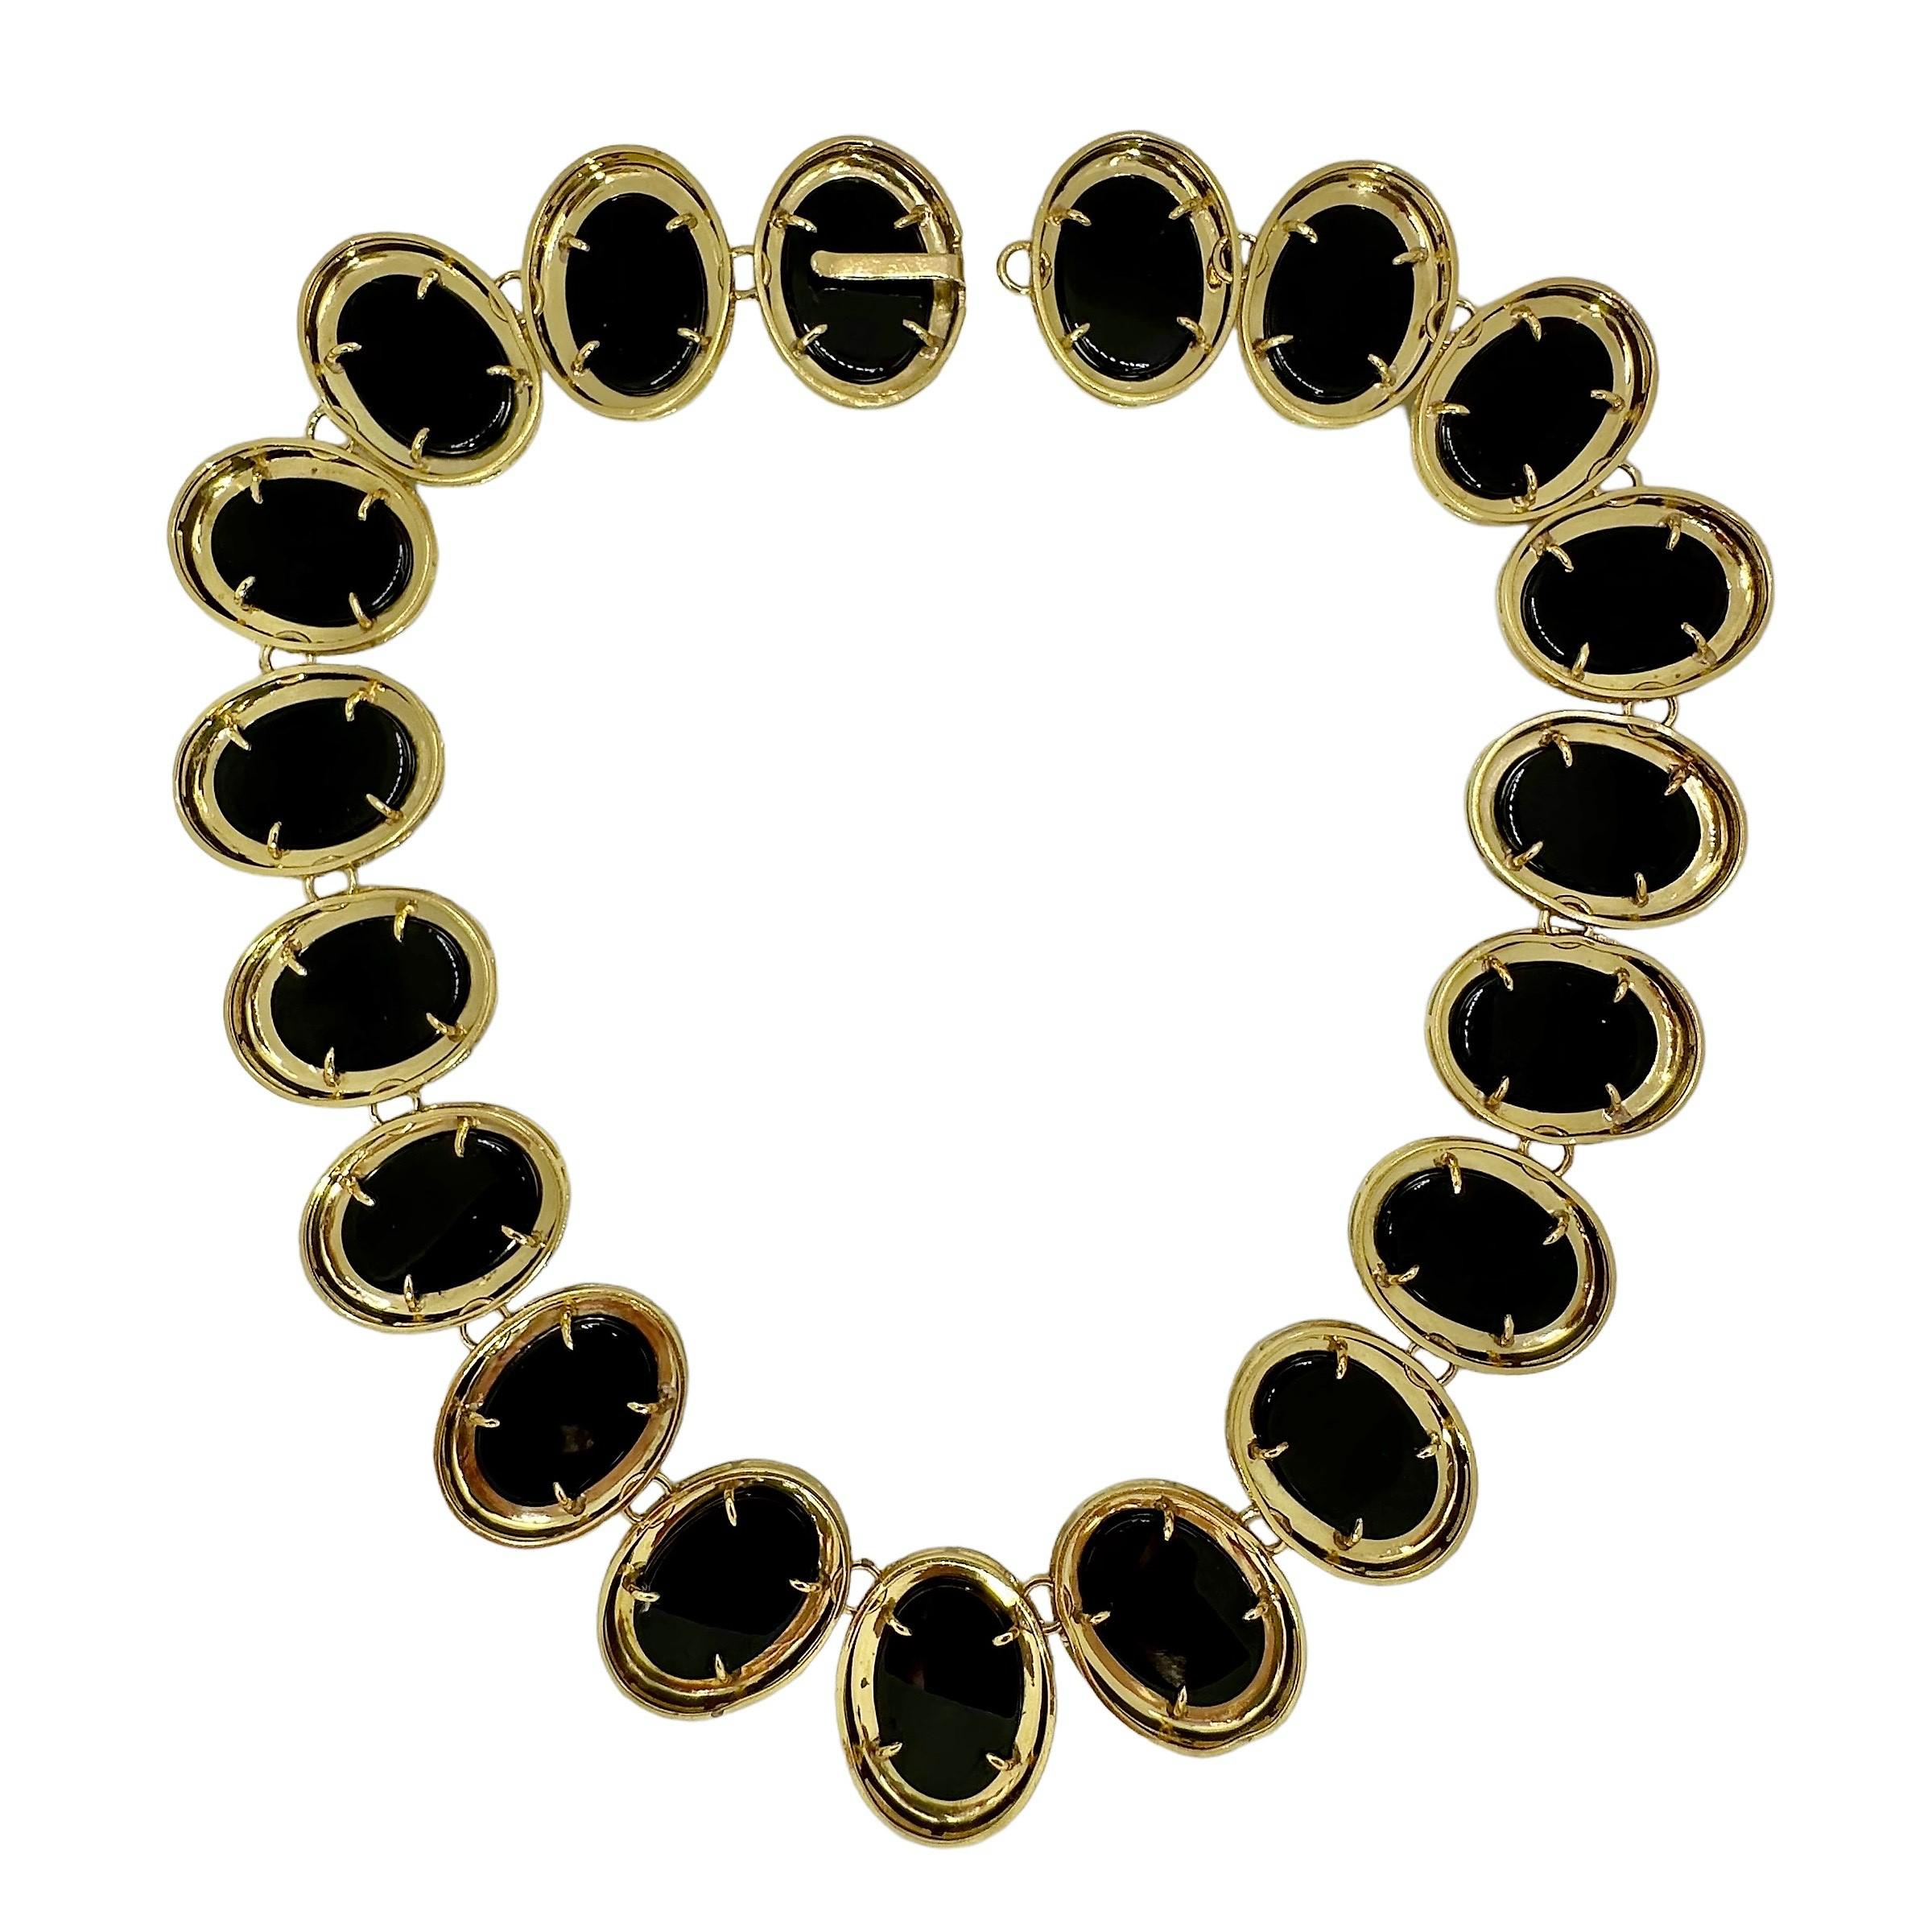 This striking Mid-20th Century 18K yellow gold choker length necklace is comprised of nineteen oval shaped links. Each link is set with one large onyx cabochon surrounded by a high polish finish 18K gold bezel. A  cleverly hidden hook clasp secures